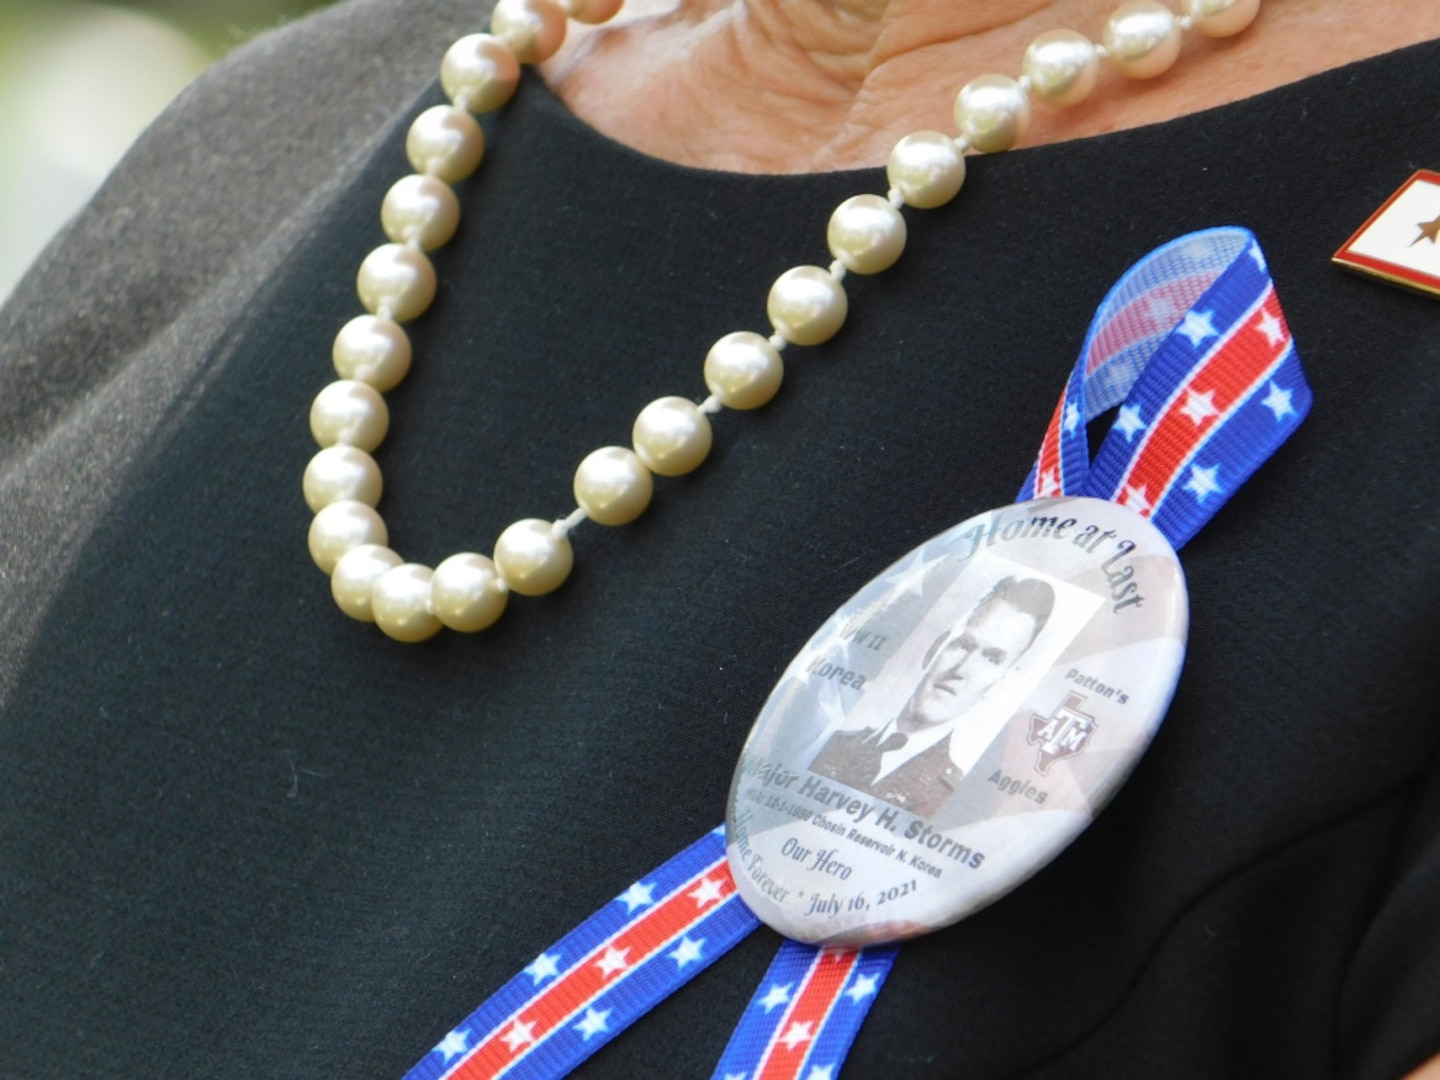 An attendee at the funeral for Army Major Harvey Storms wears a ribbon to remember the Texas native who was buried in Arlington National Cemetery on July 16, 2021. Major Storms was reported missing in action on Dec. 1, 1950, when his unit was attacked by enemy forces near the Chosin Reservoir, North Korea. Following the battle, his remains could not be recovered. The Defense POW/MIA Accounting Agency was able to identify the remains in 2019. (Defense Photo by Ashley M. Wright)